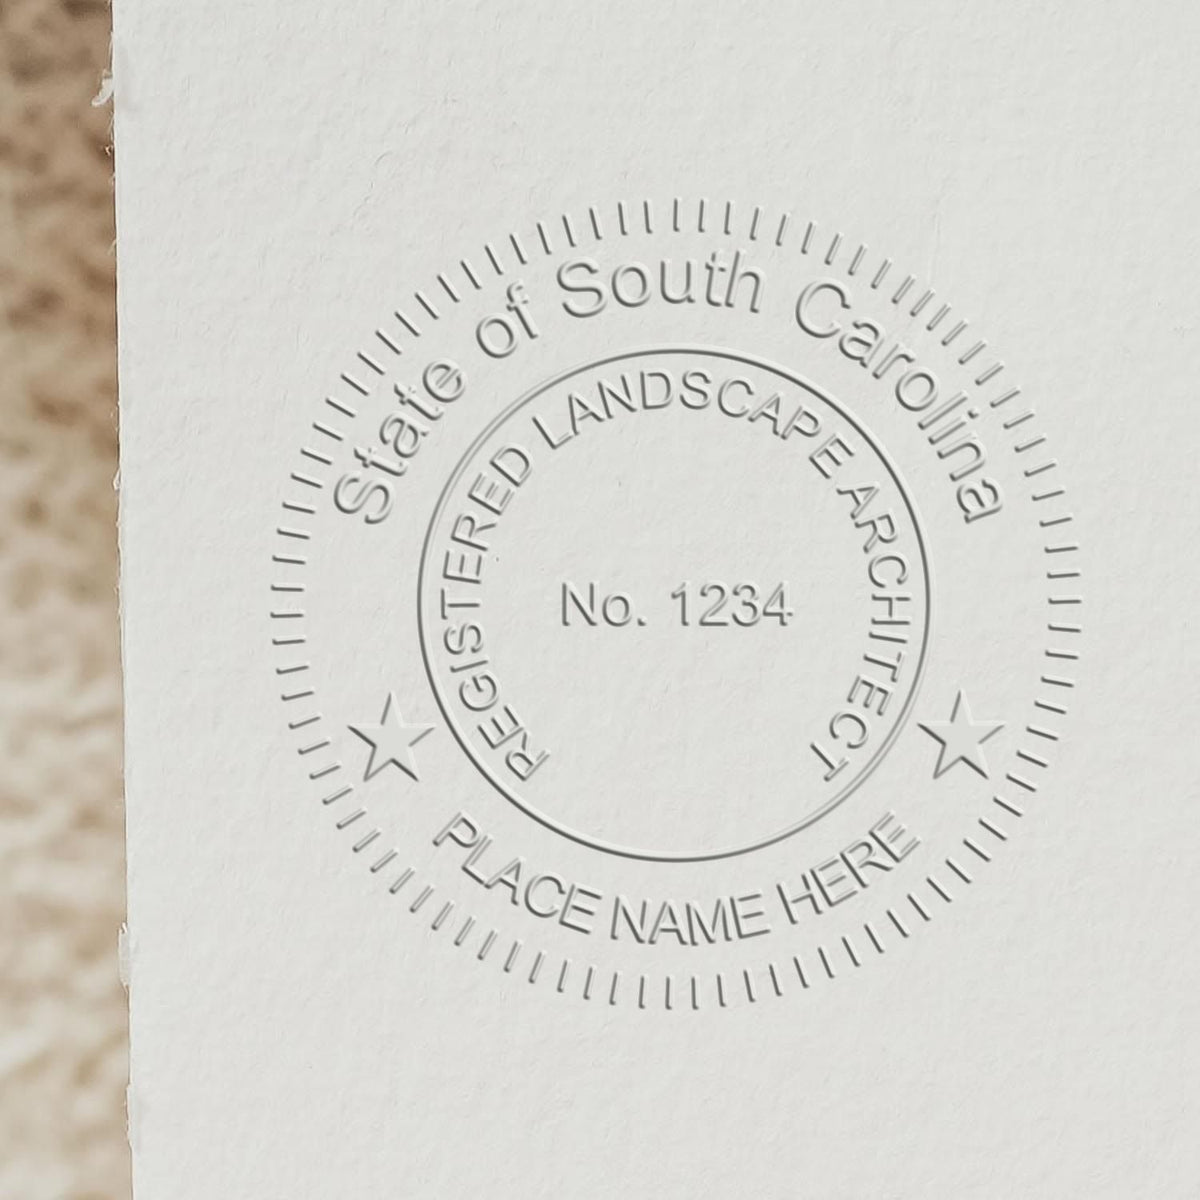 The Gift South Carolina Landscape Architect Seal stamp impression comes to life with a crisp, detailed image stamped on paper - showcasing true professional quality.